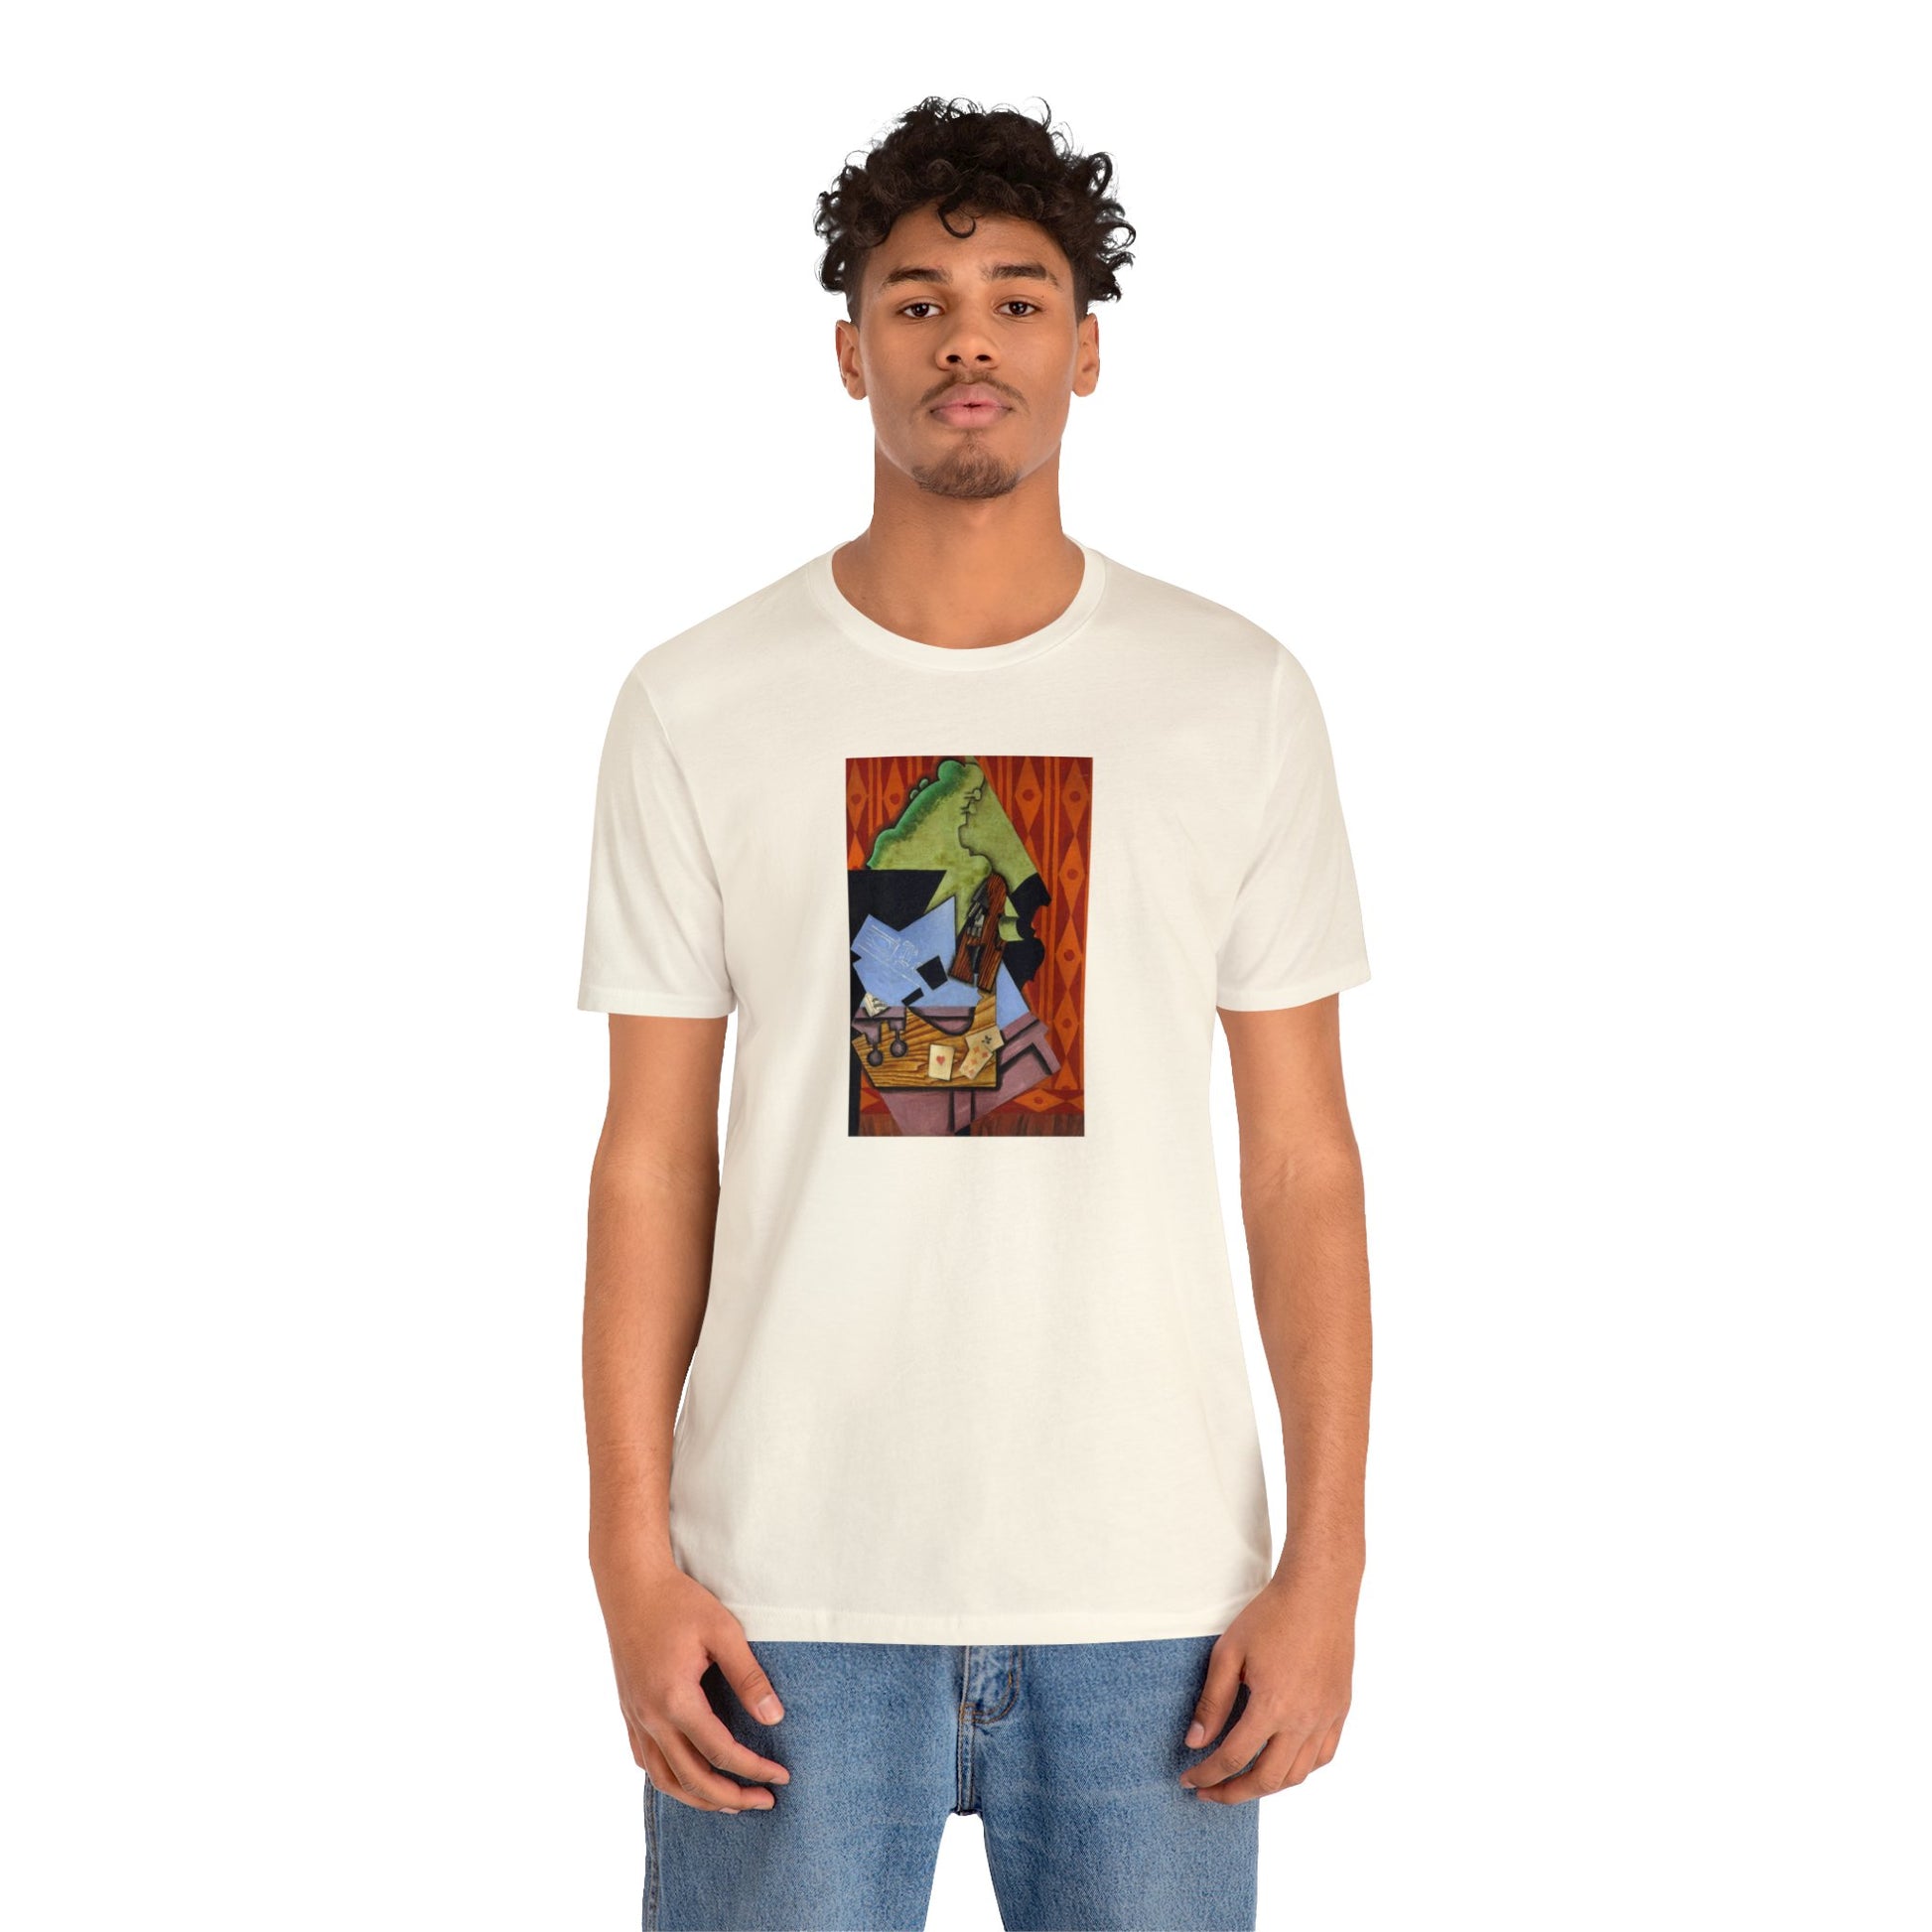 JUAN GRIS - VIOLIN AND PLAYING CARDS ON A TABLE - UNISEX JERSEY T-SHIRT